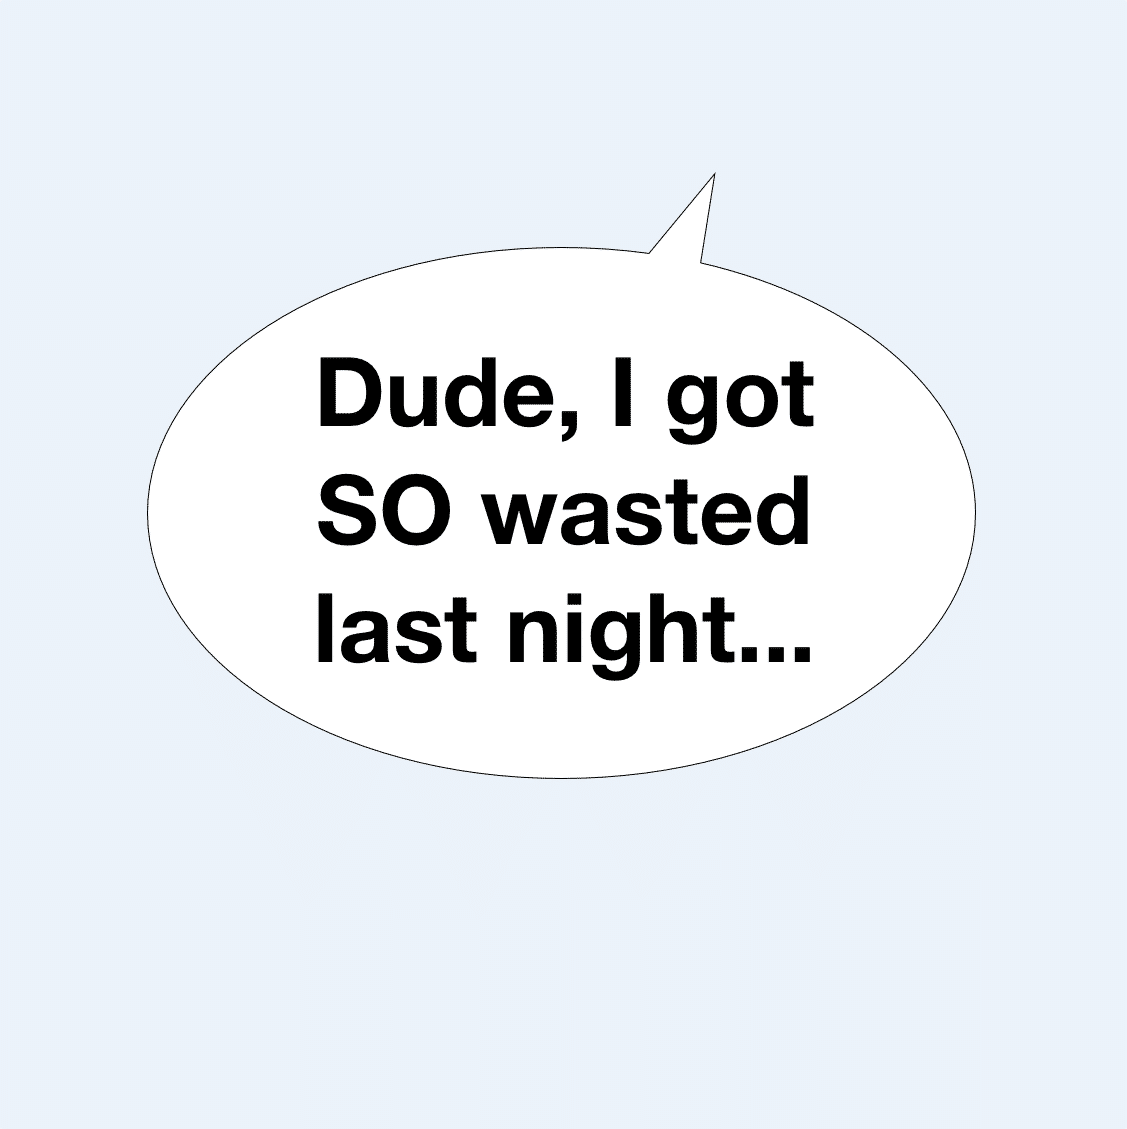 Dude, I had an insane night last night, totally wasted.